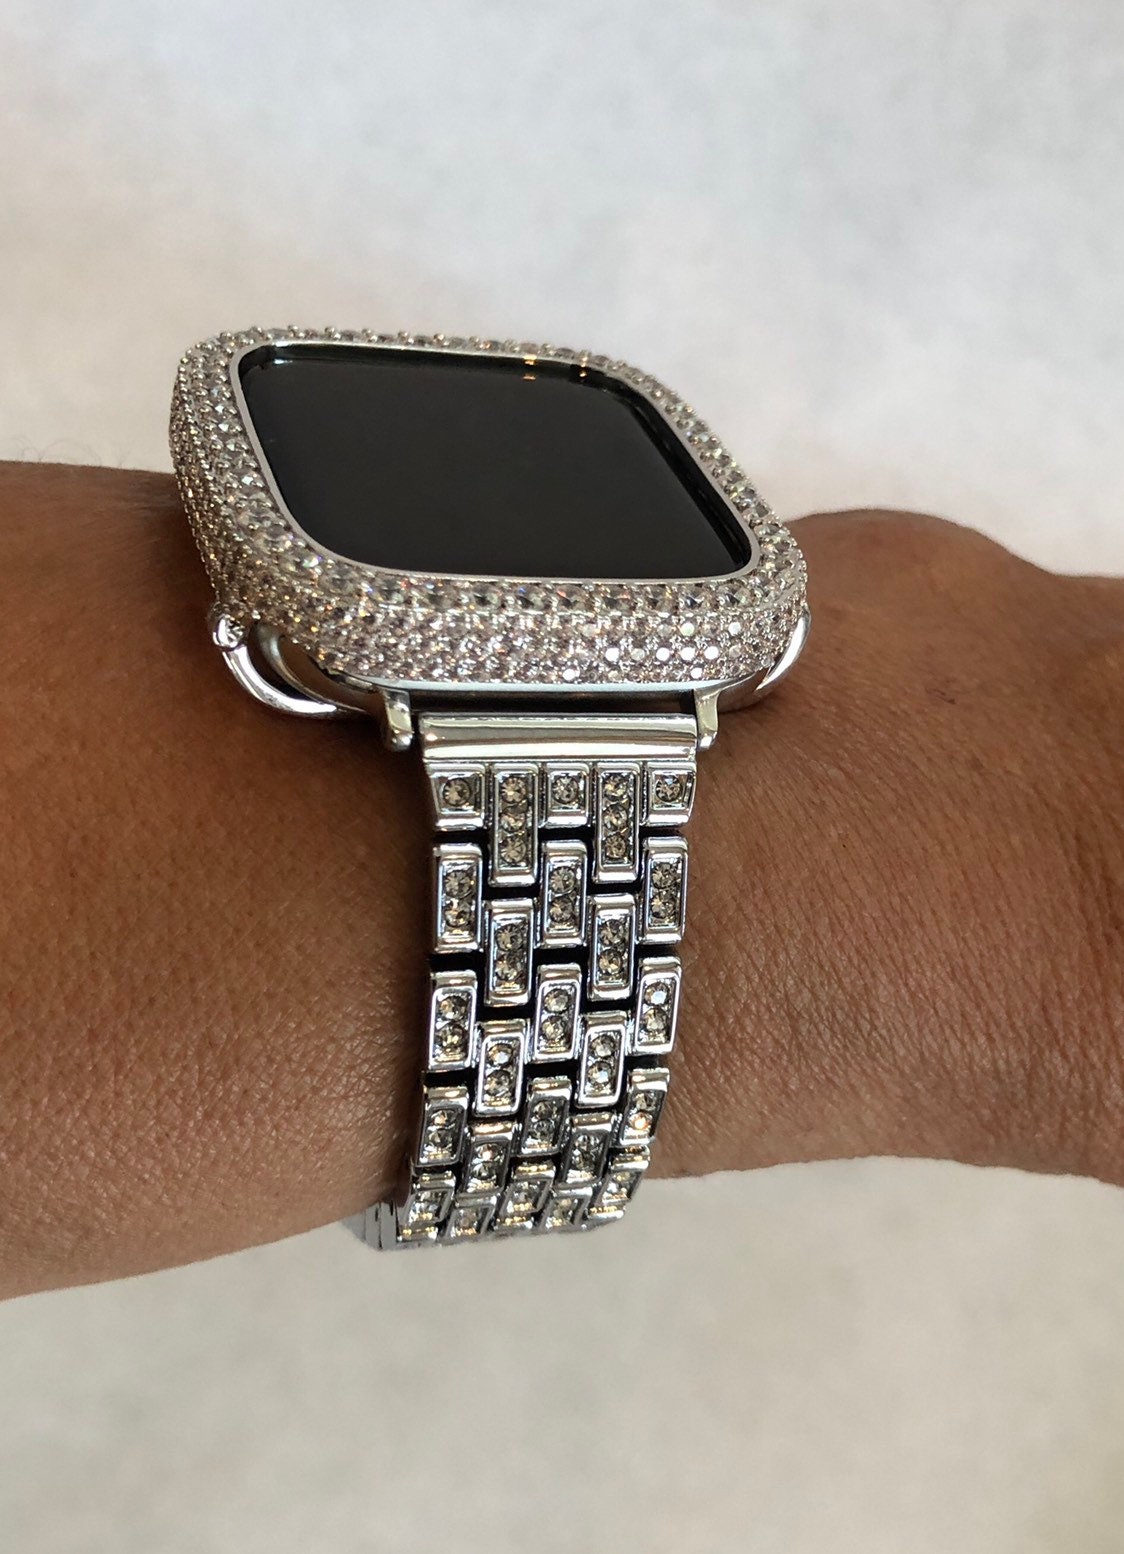 Silver Apple Watch Band 38mm-44mm Series 6 and or 2.5mm Lab Diamond